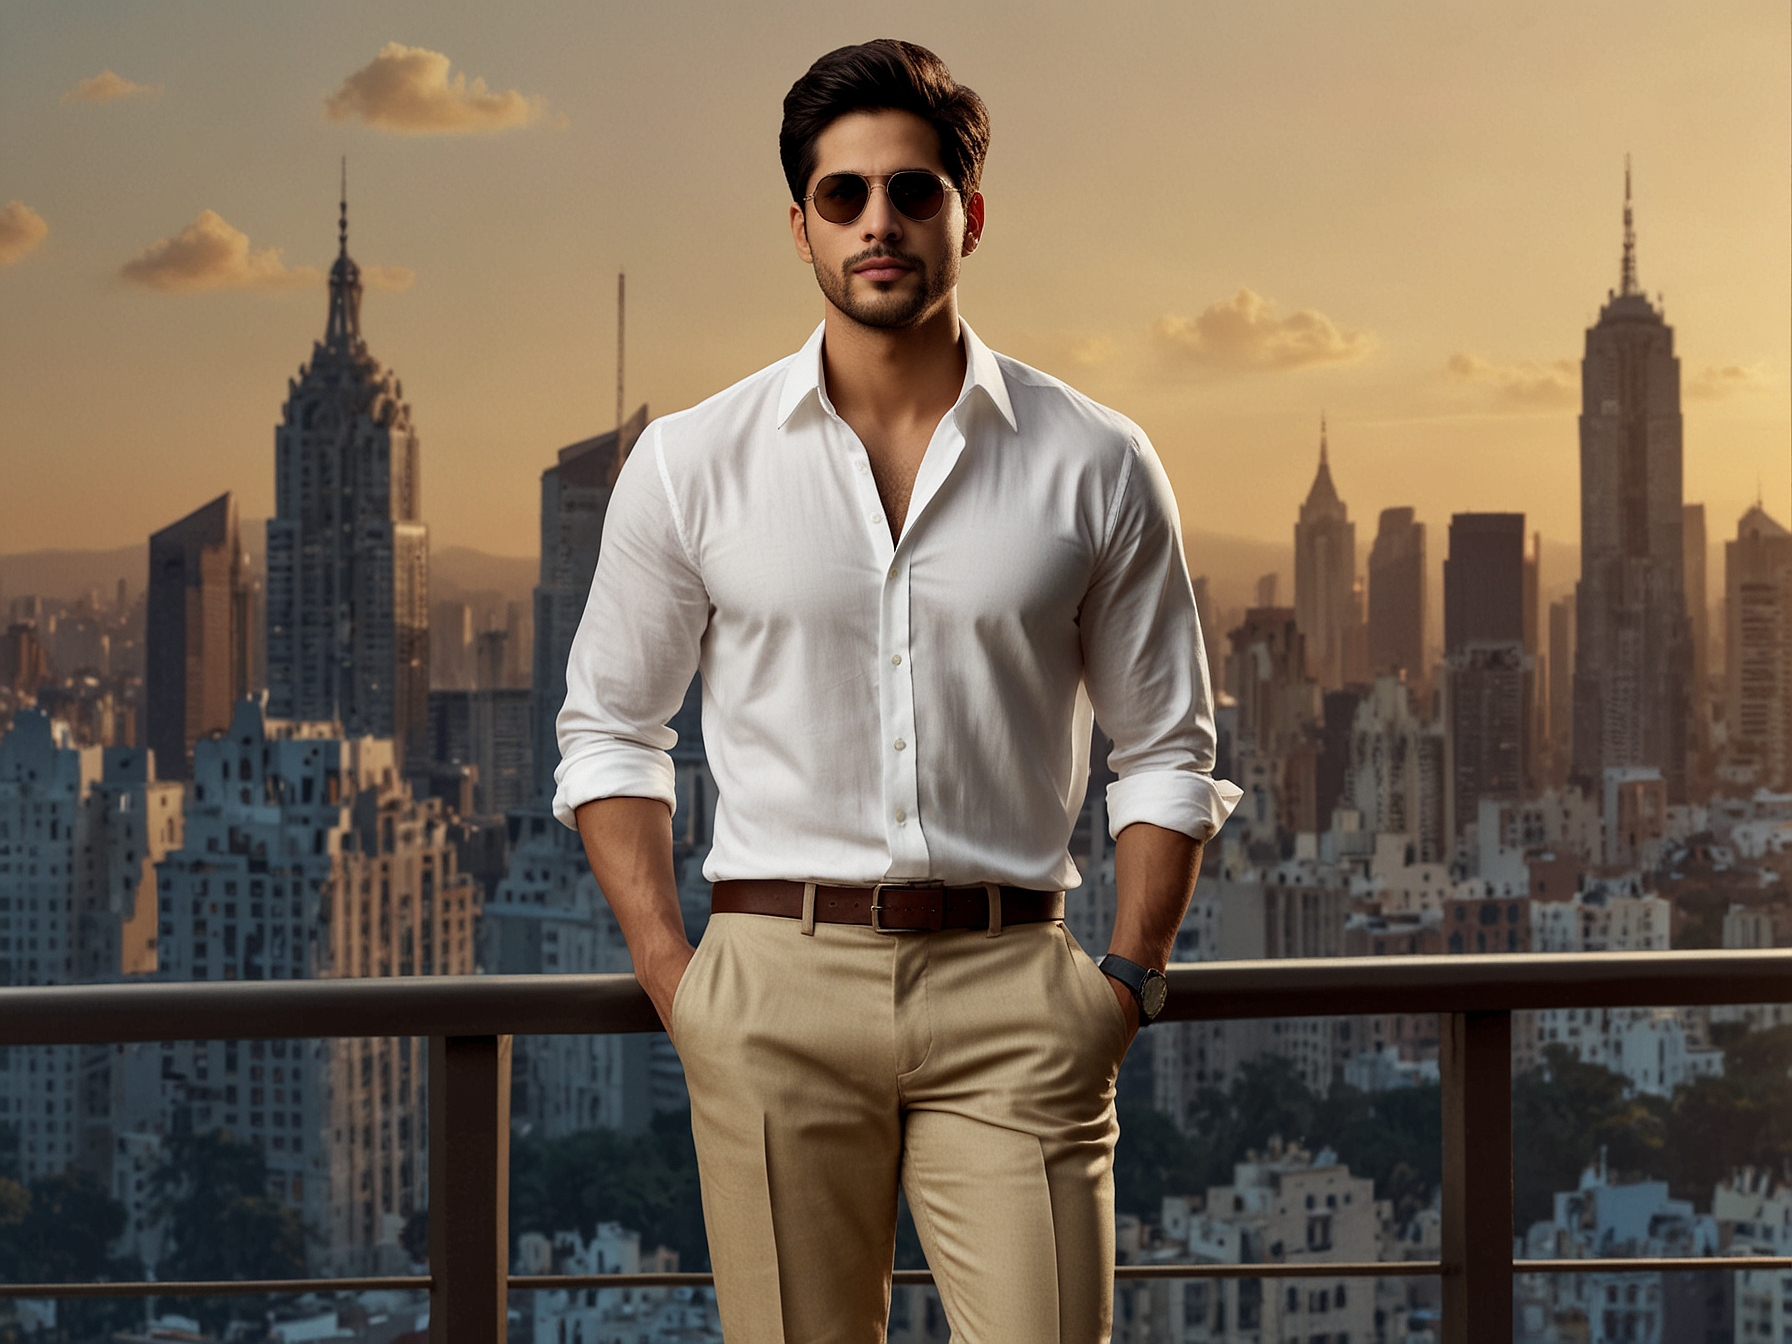 Sidharth Malhotra exudes sophistication in a pristine white linen shirt and beige trousers, accessorized with classic sunglasses. The European cityscape backdrop enhances the evening summer charm.